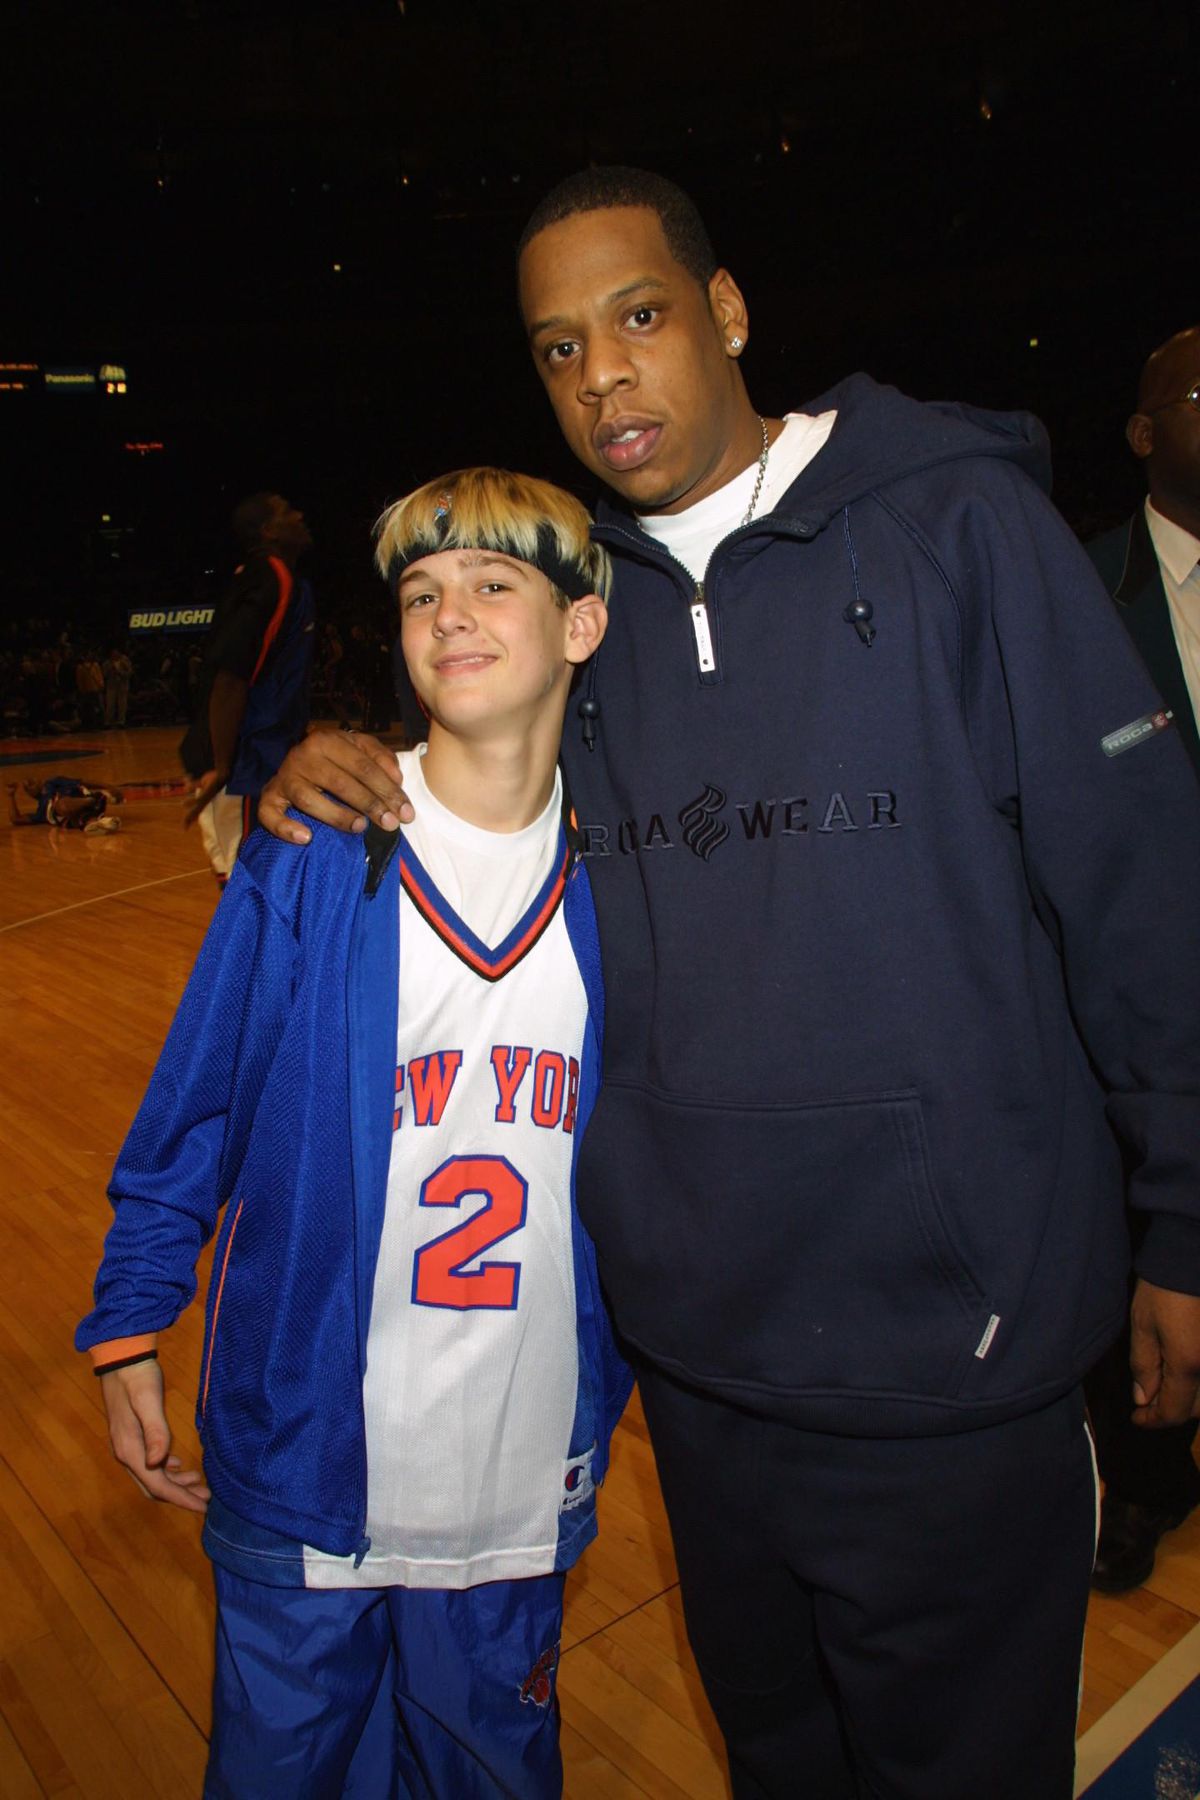 Aaron Carter Concert at NY Knicks Kids Day